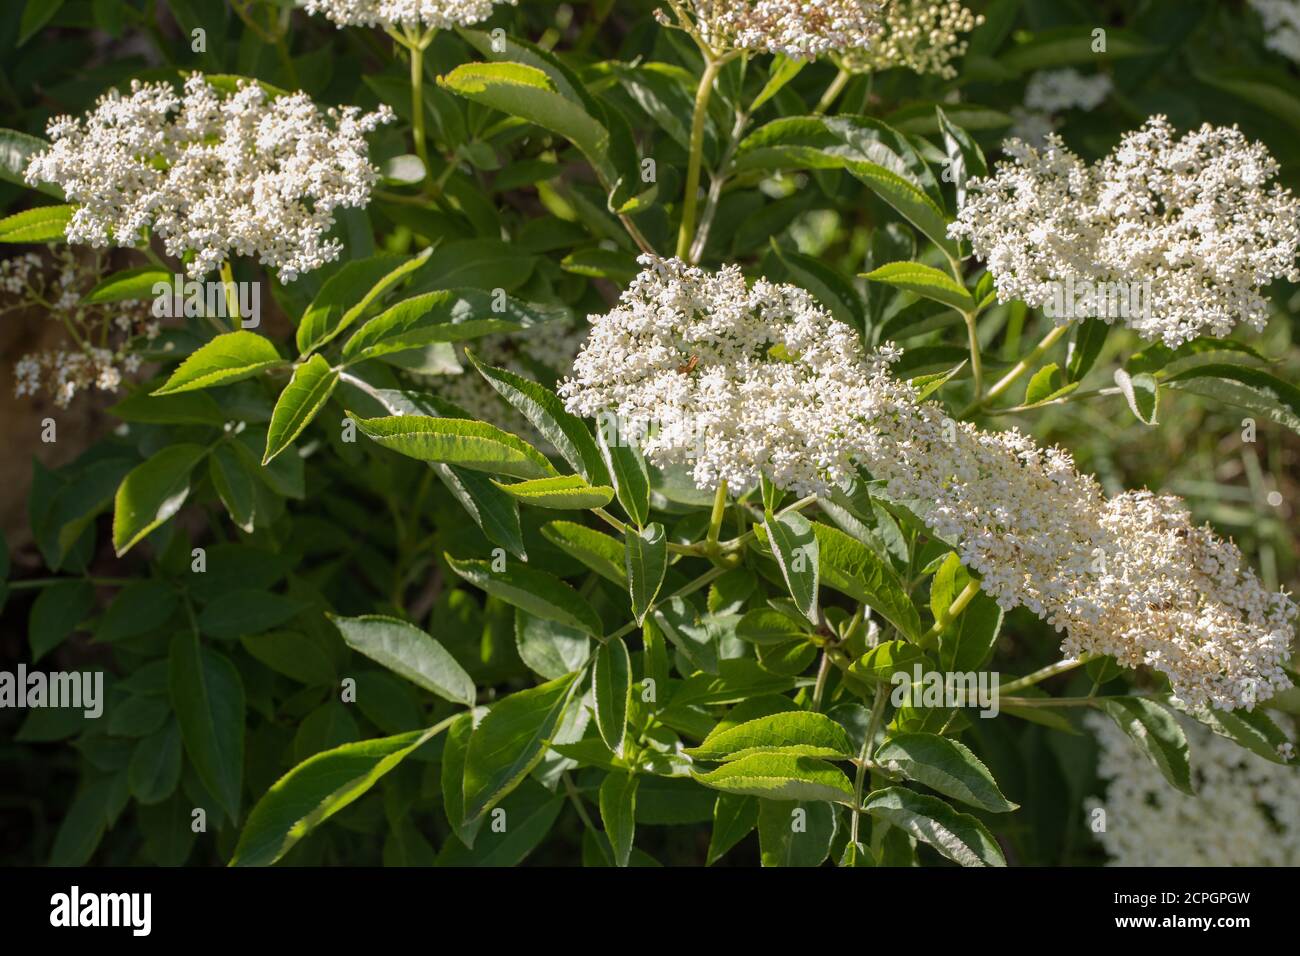 Elder (Sambucus nigra). Multiple bunches of flat-topped heads of numerous cream-white flowers. Stalked compound leaves of five to severn leaflets. Stock Photo